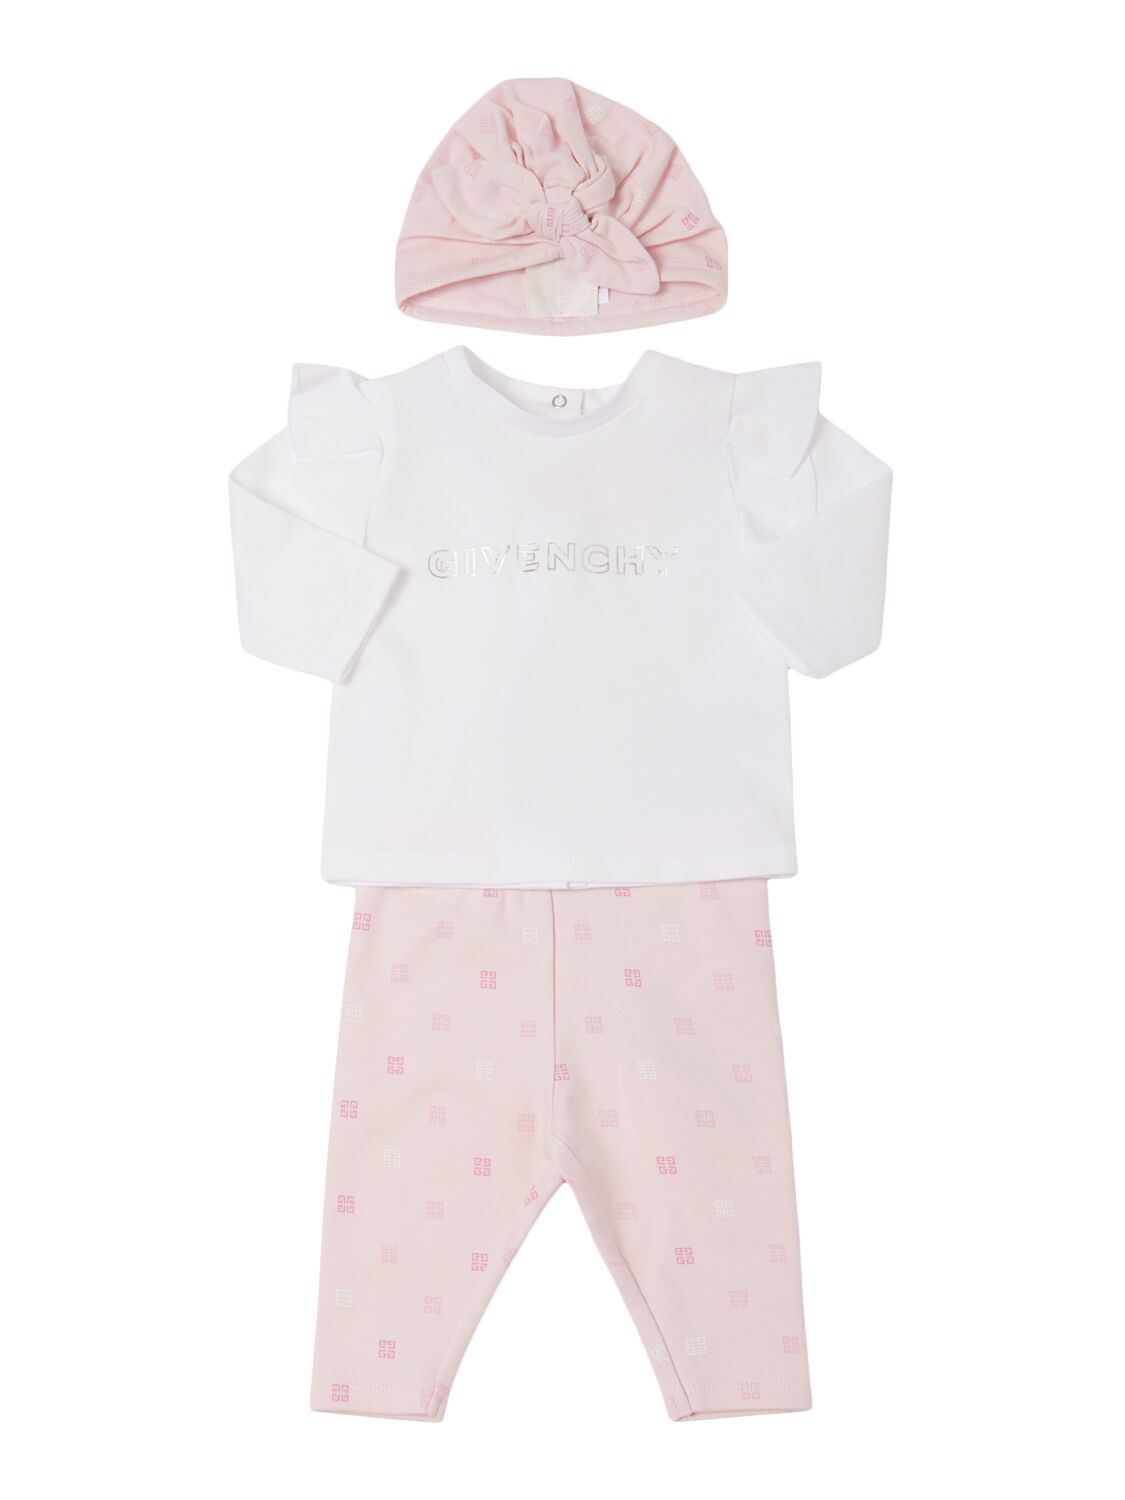 Givenchy Cotton Jersey T-shirt, Pants & Hat In Pink